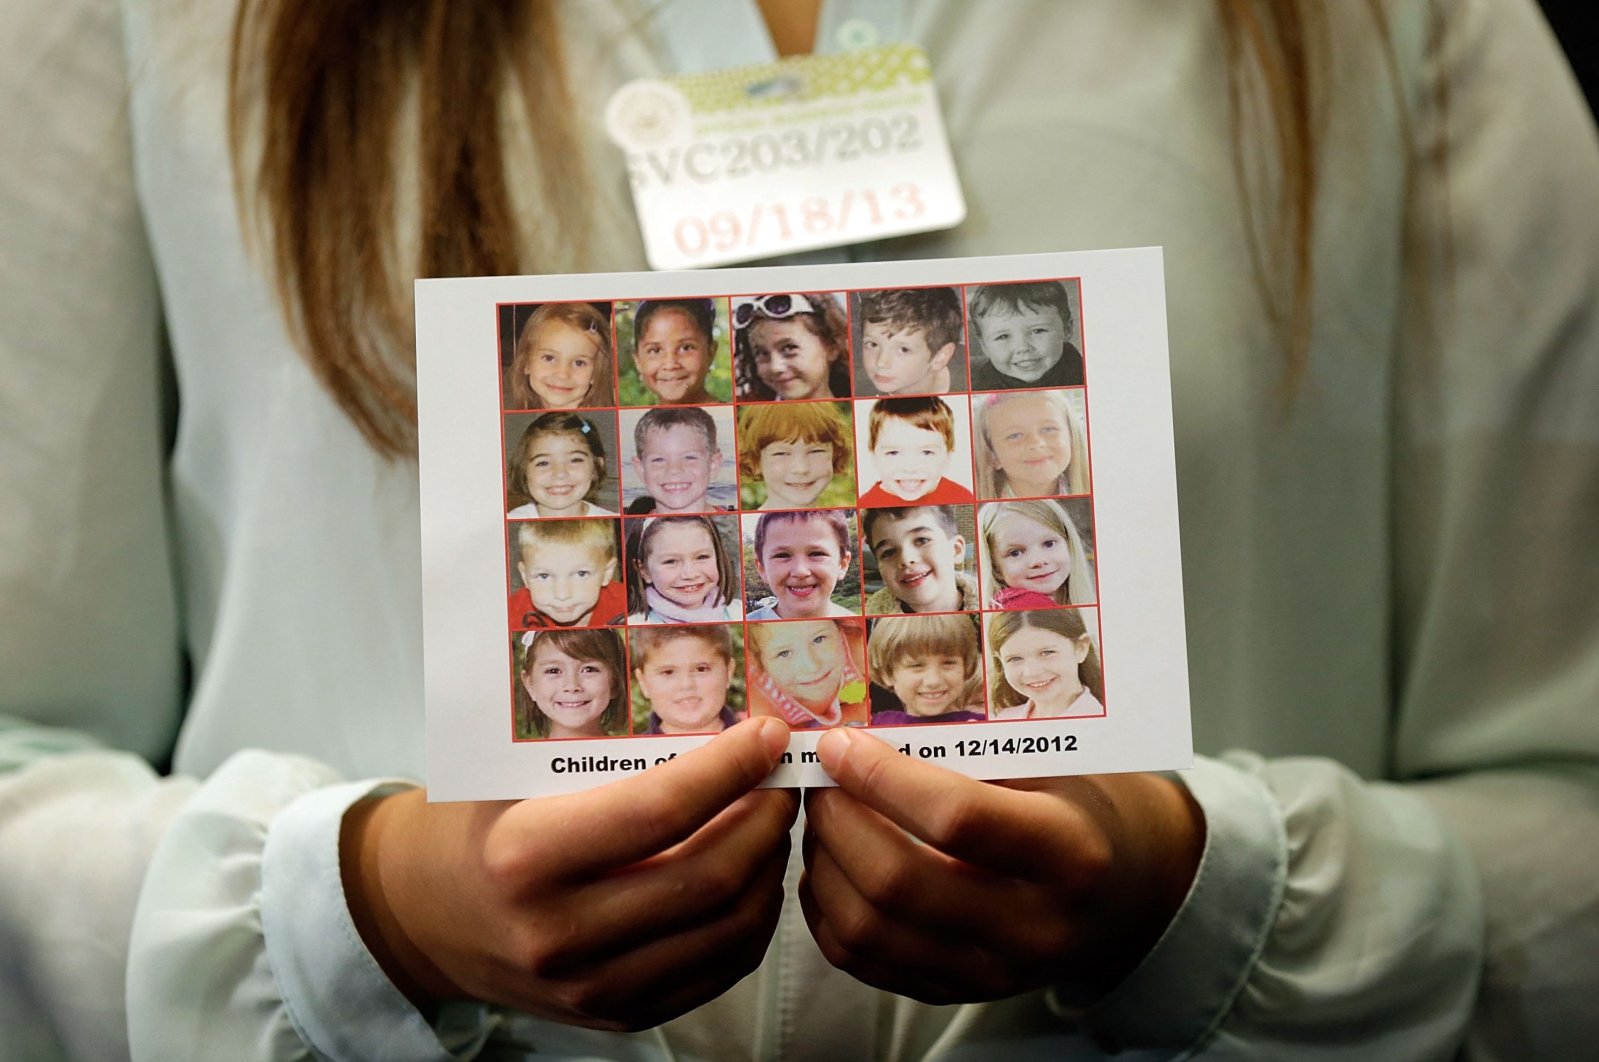 Kyra Murray holds a photo with victims of the shooting at Sandy Hook Elementary School during a press conference at the U.S. Capitol calling for gun reform legislation and marking the 9-month anniversary of the shooting in Washington, D.C., Sept.17, 2013. (AFP File Photo)